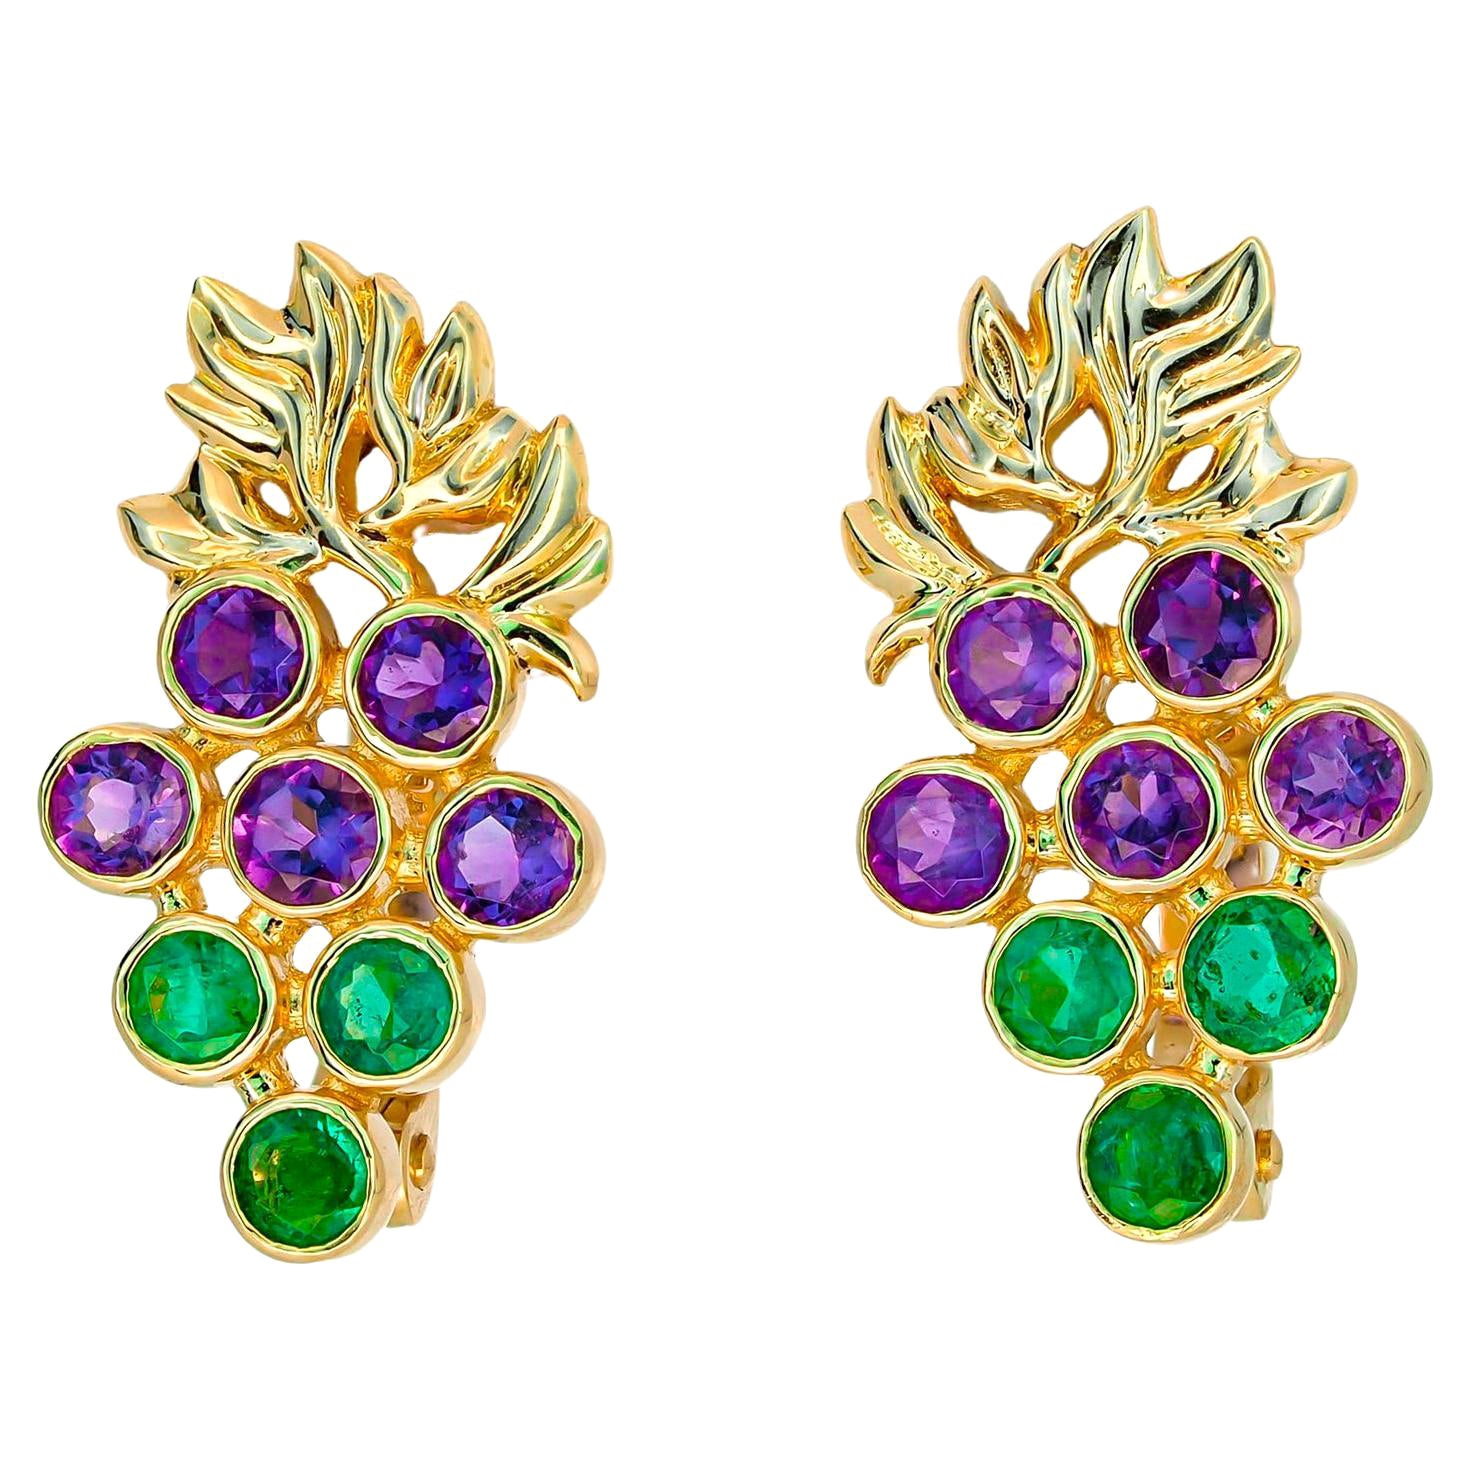 14k Gold Grape Earrings with Emeralds and Amethysts For Sale